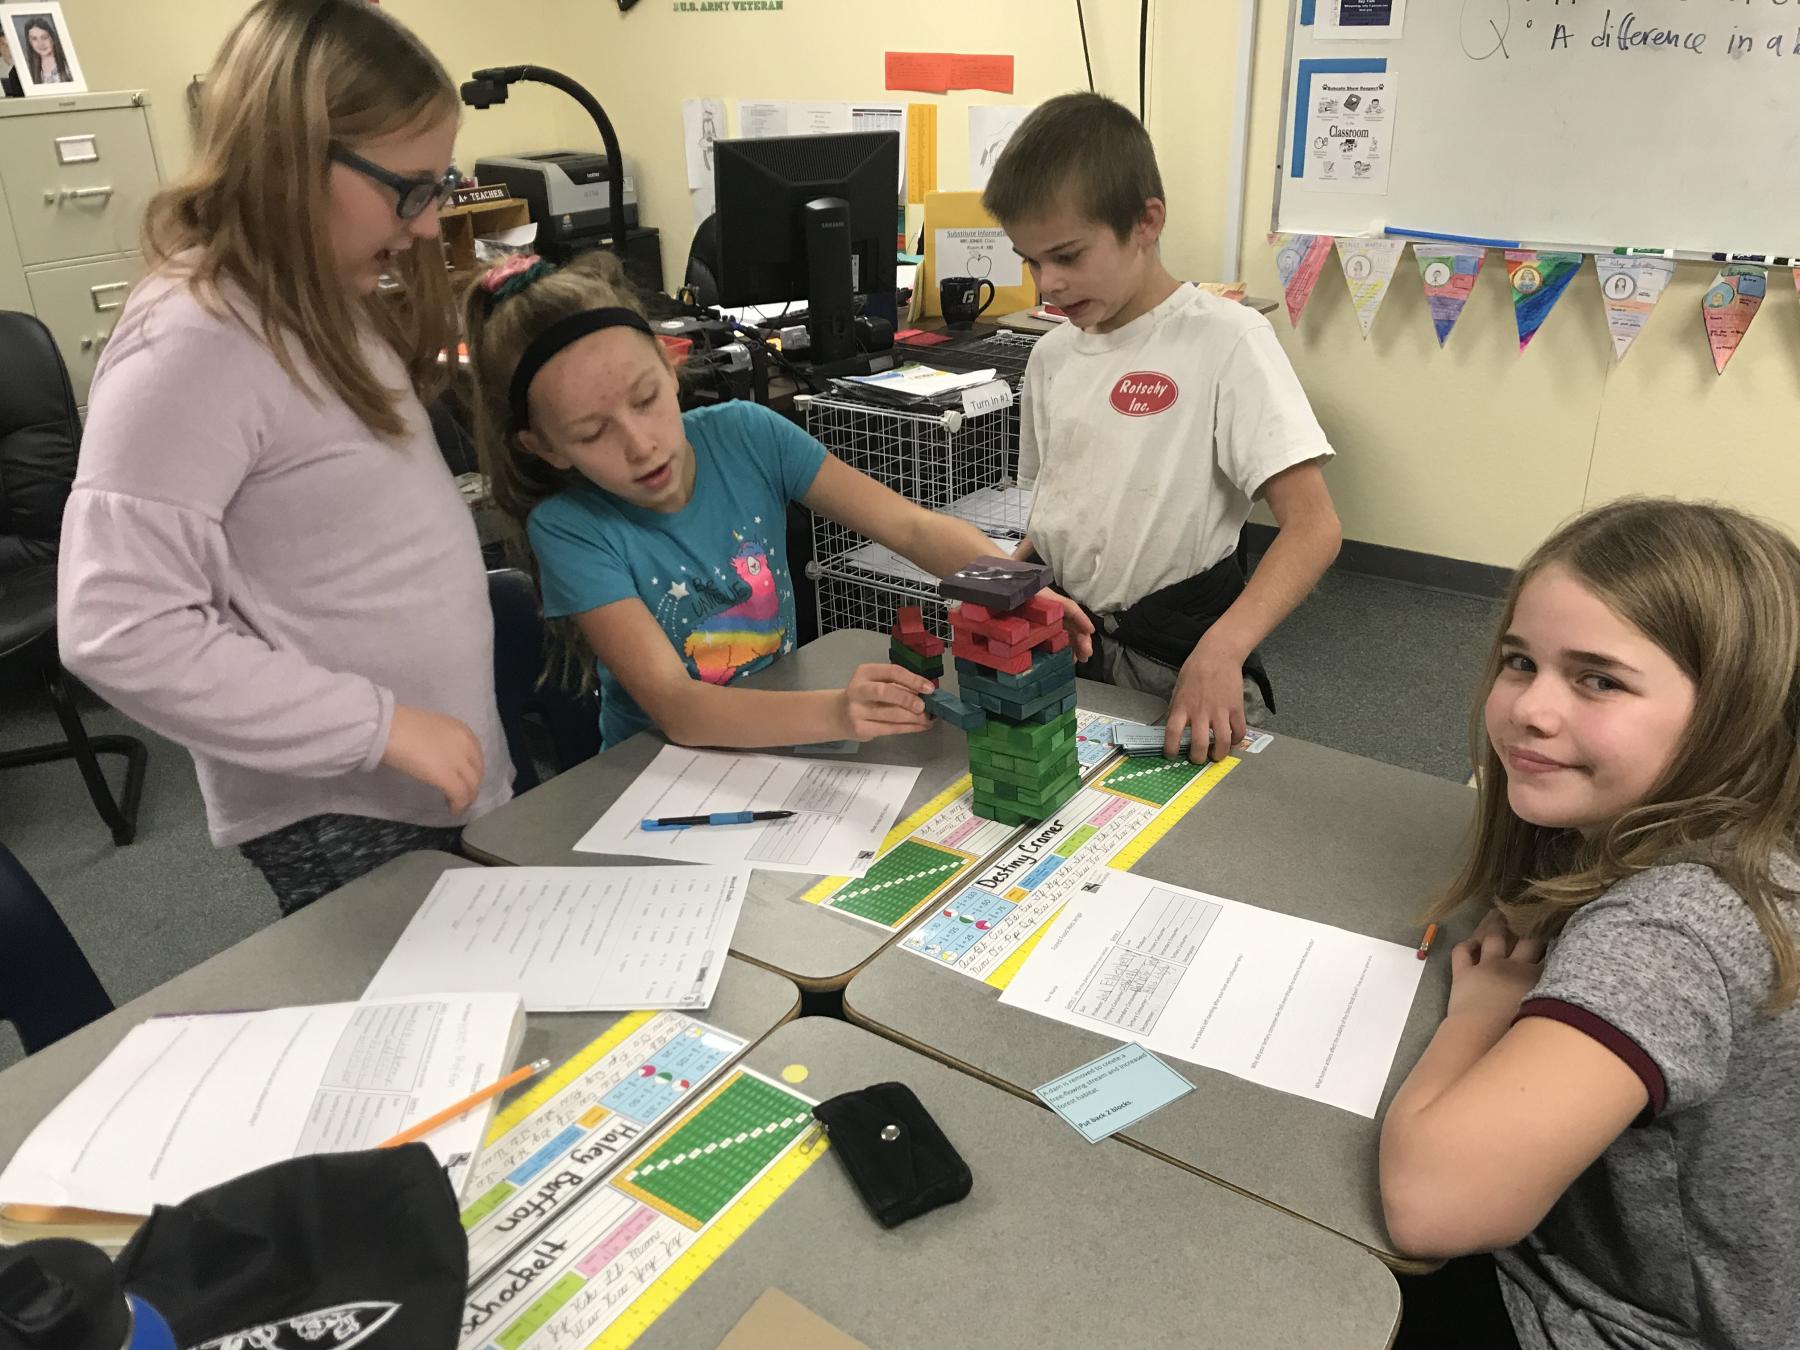 Four students collaborate on a science activity